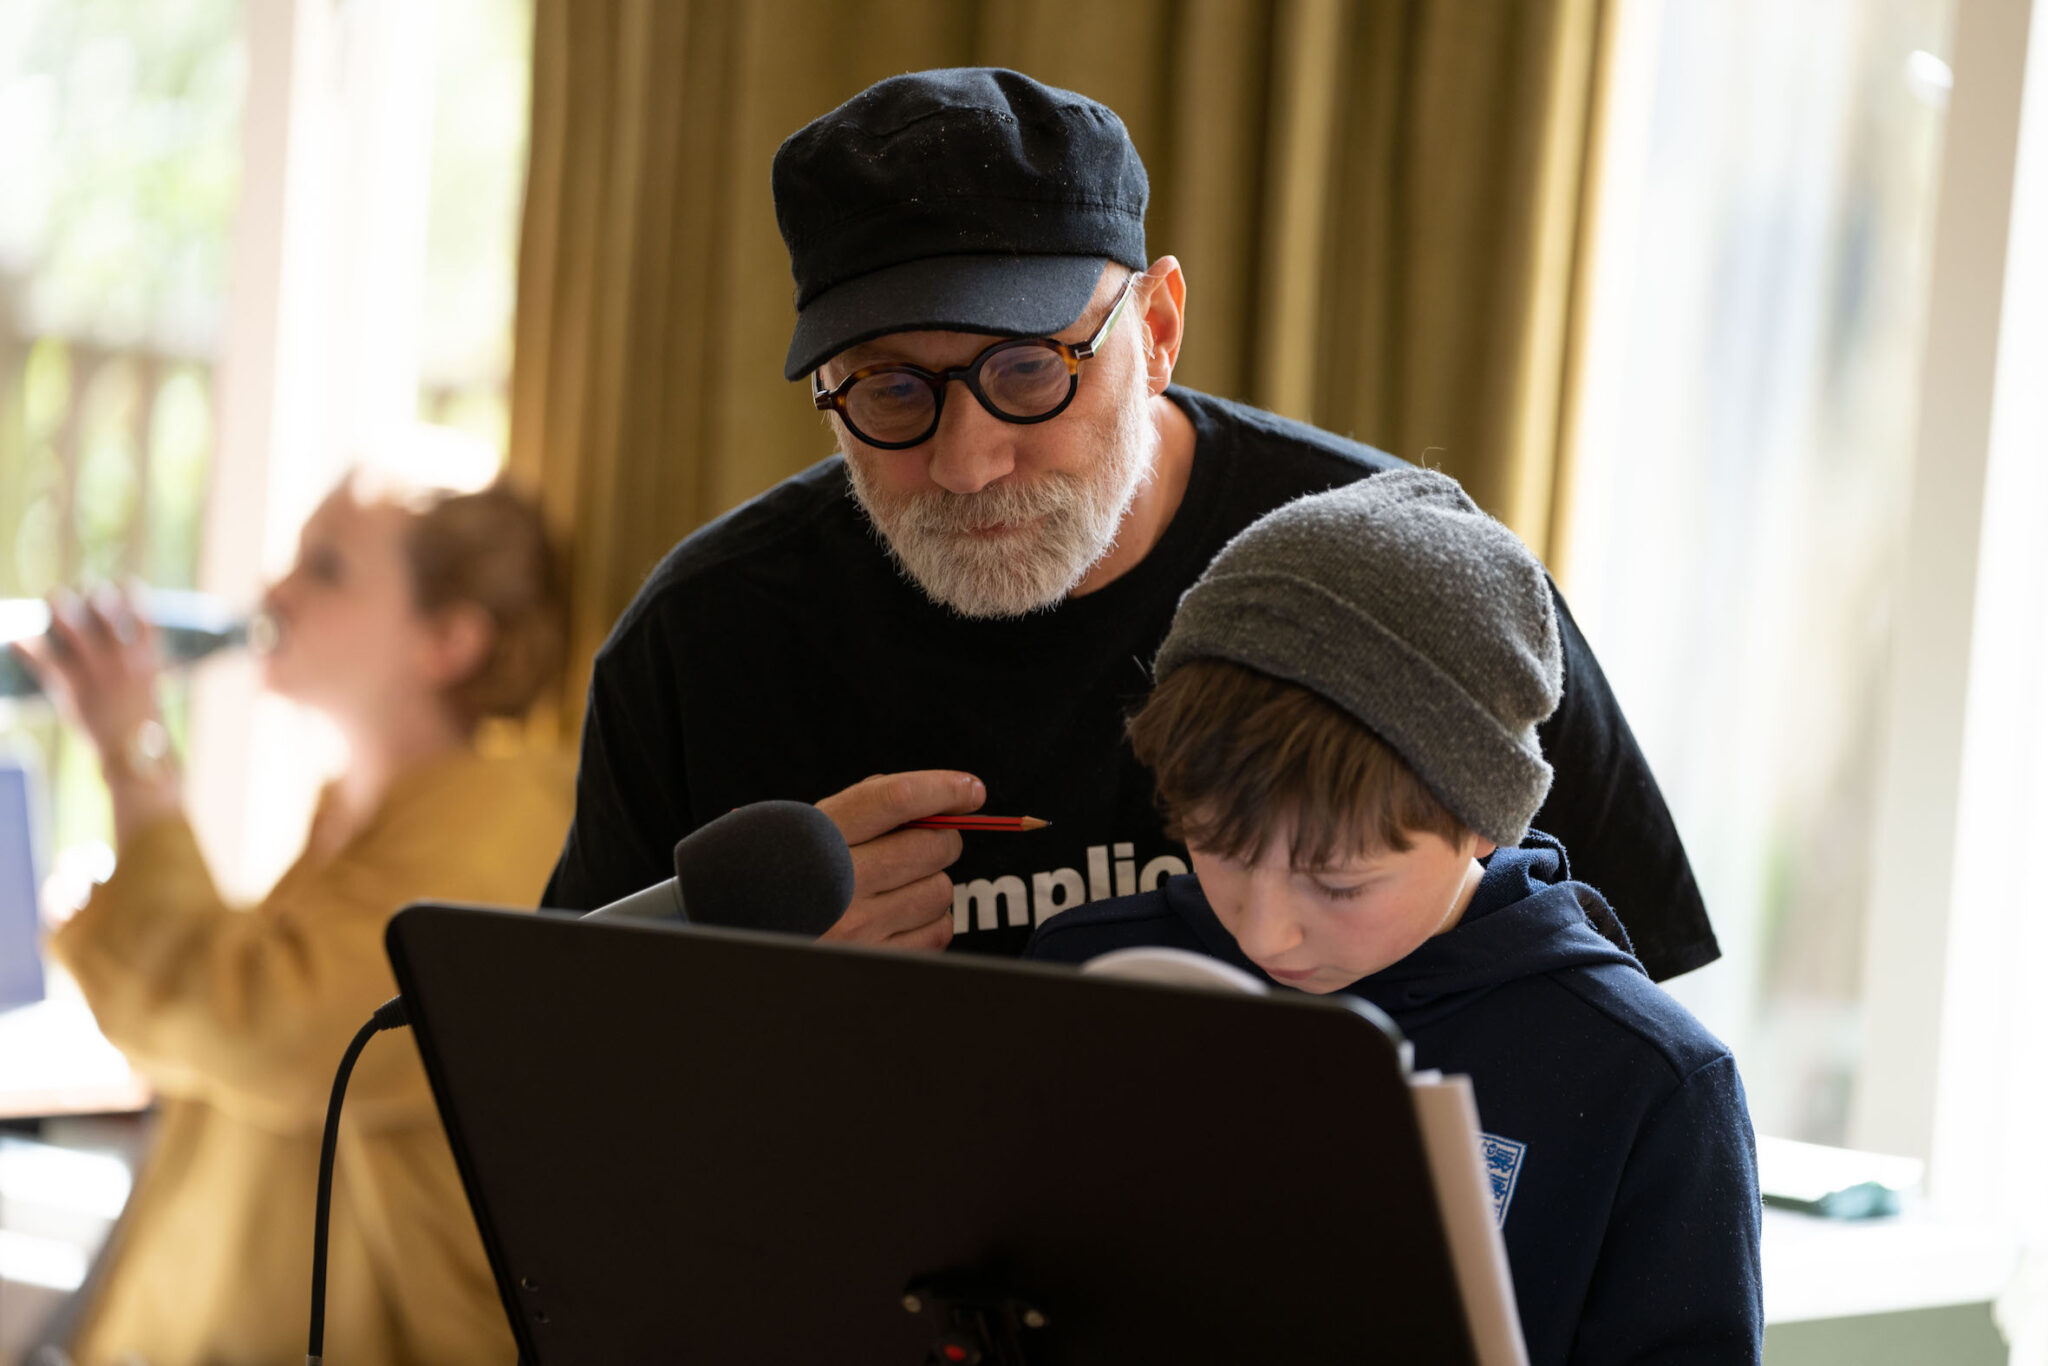 Simon McBurney and a child actor work on the script together at a music stand